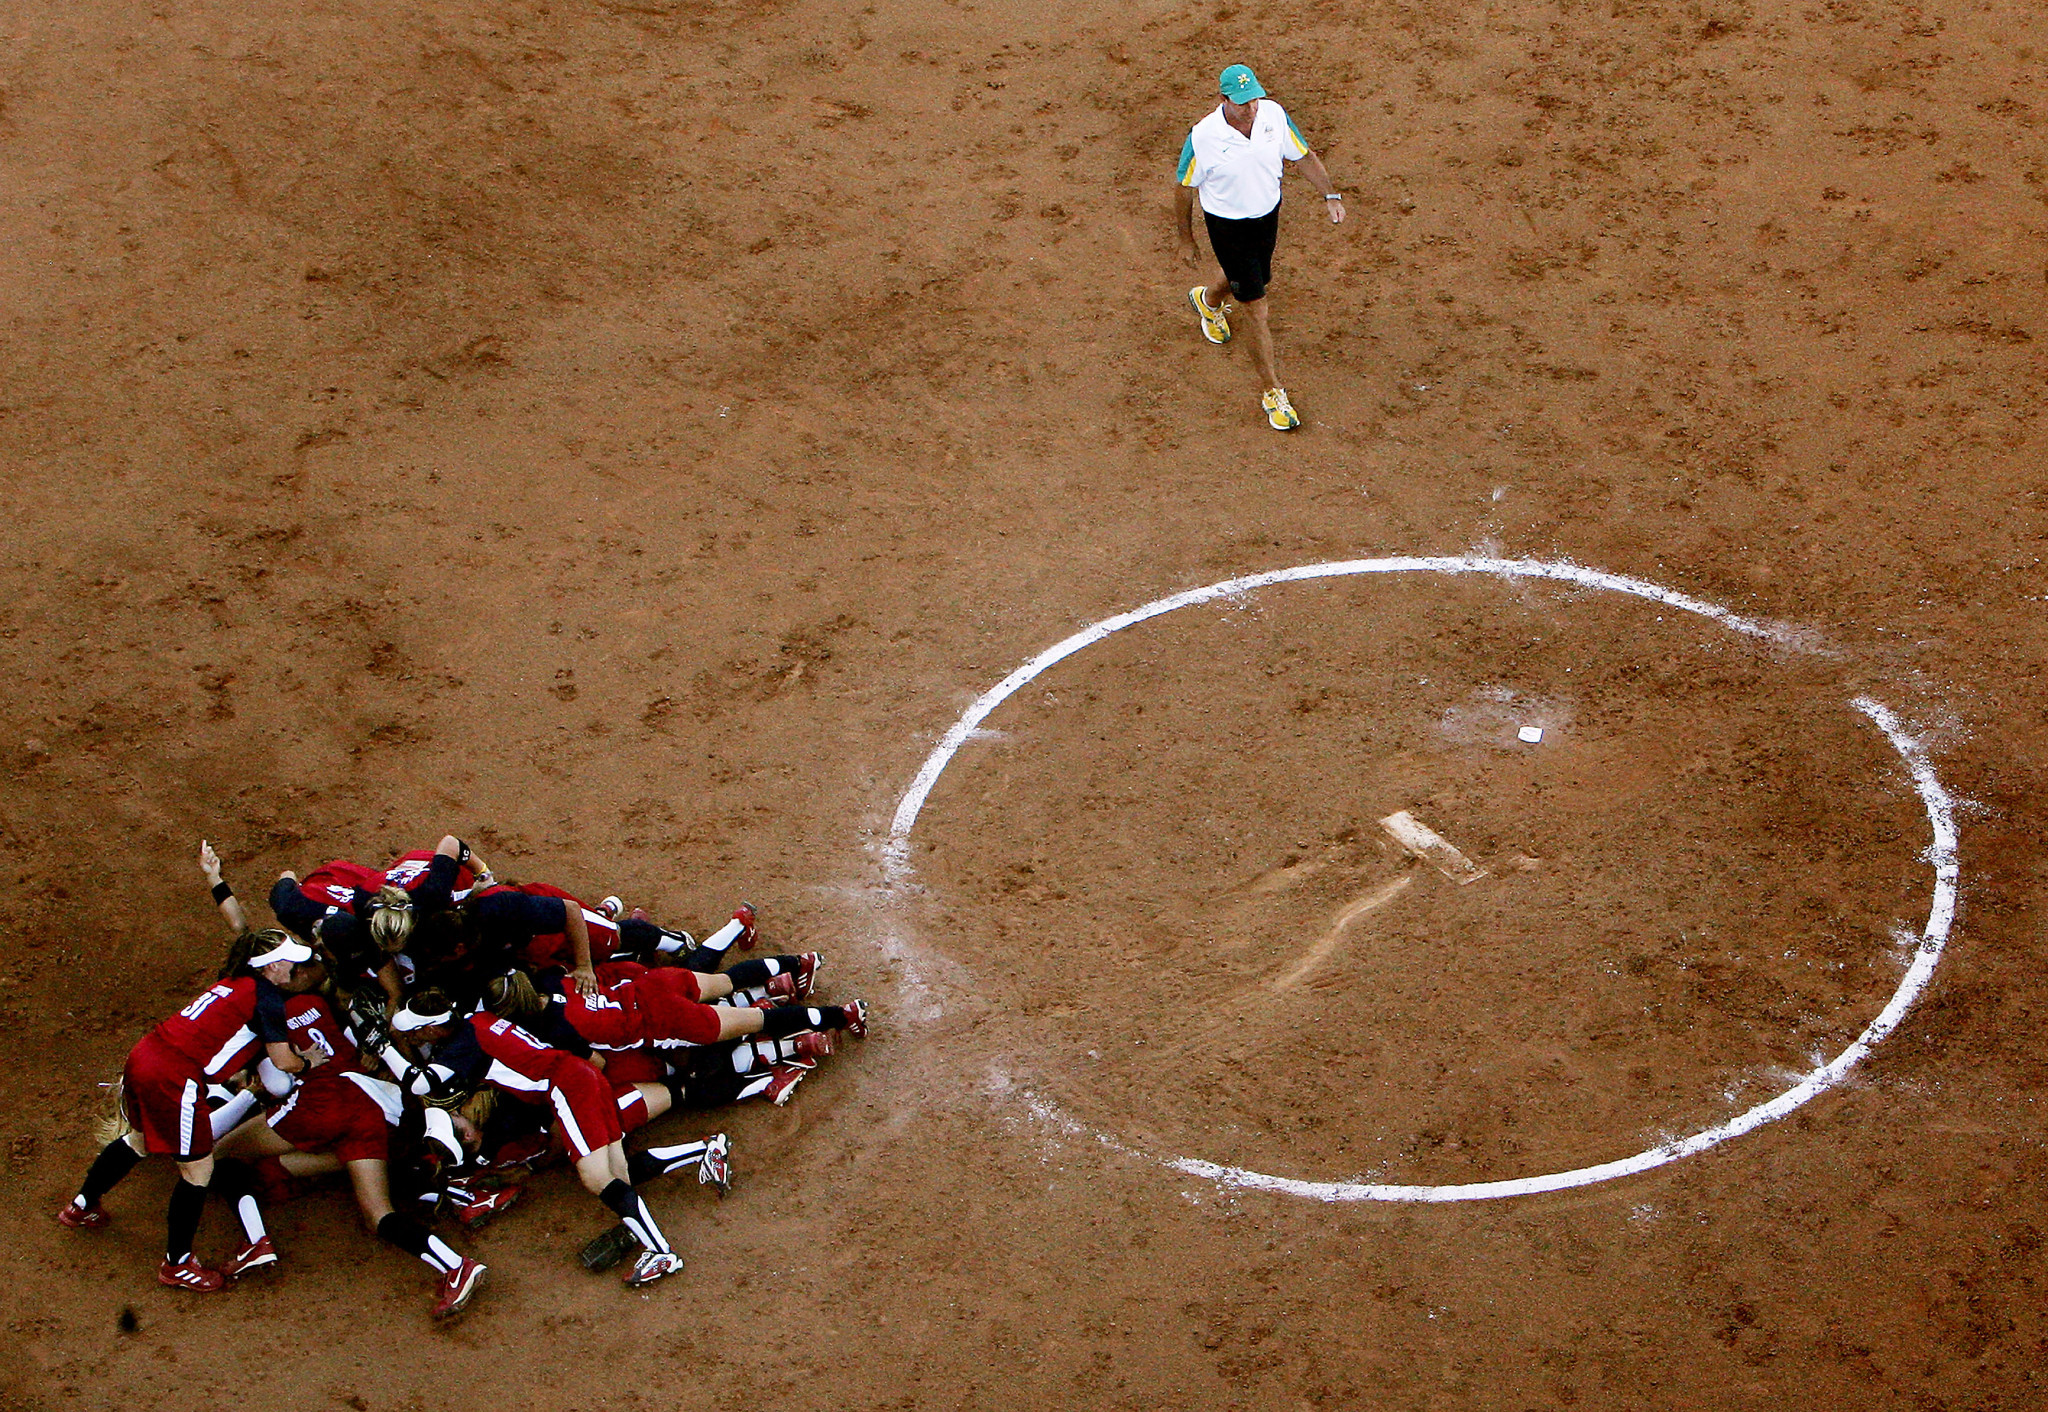 Lovie Jung and Natasha Watley helped the US win softball gold at Athens 2004 ©Getty Images